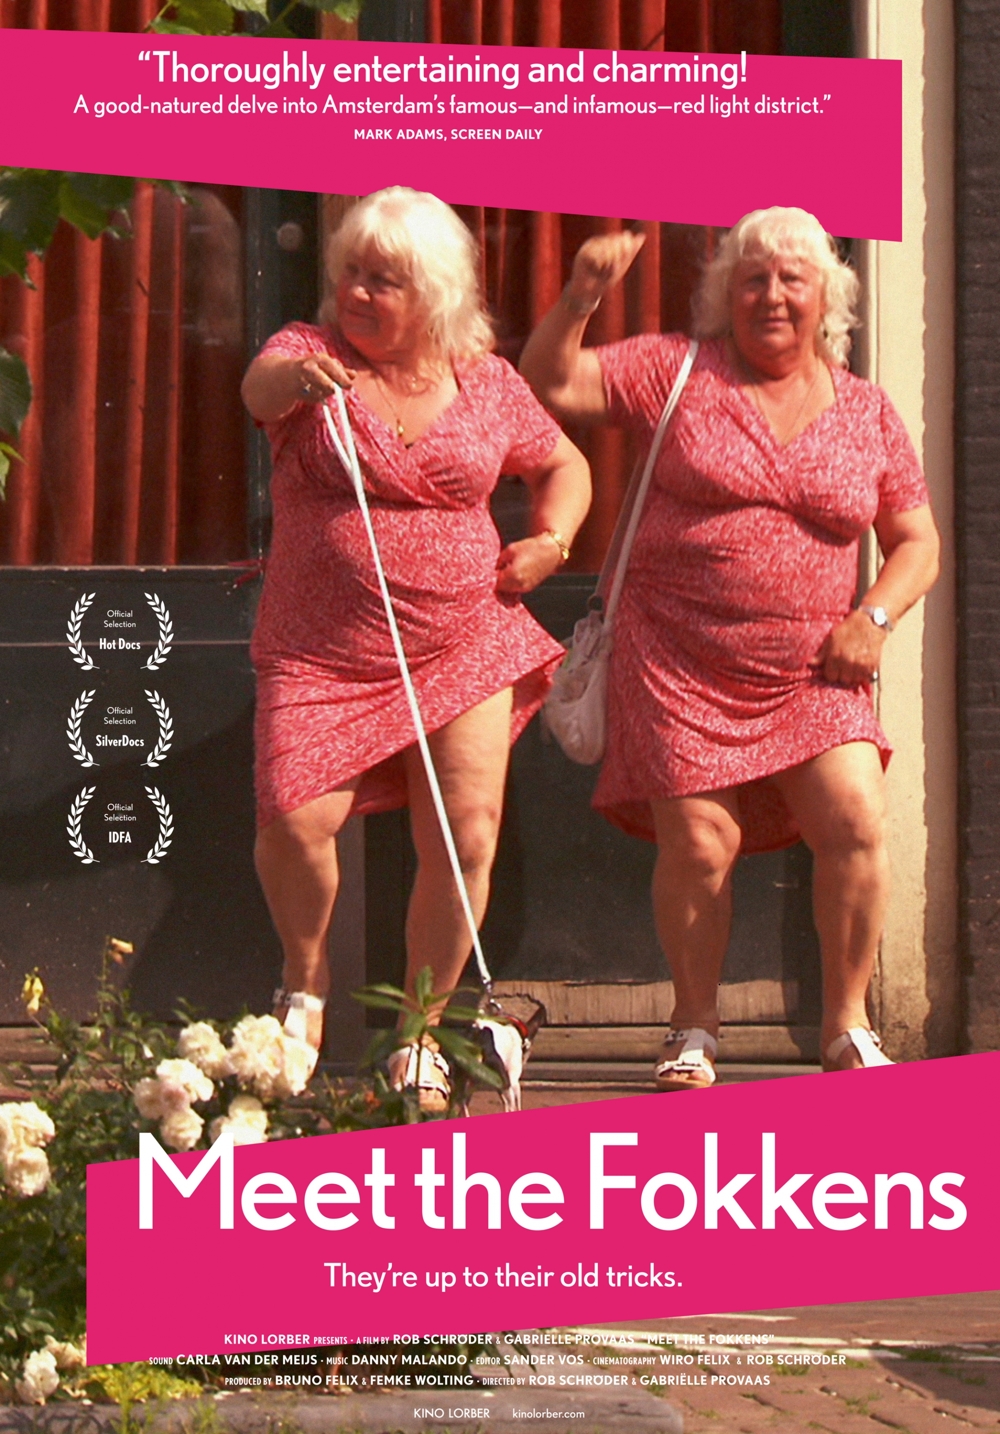 The Controversial Fokken Twins!